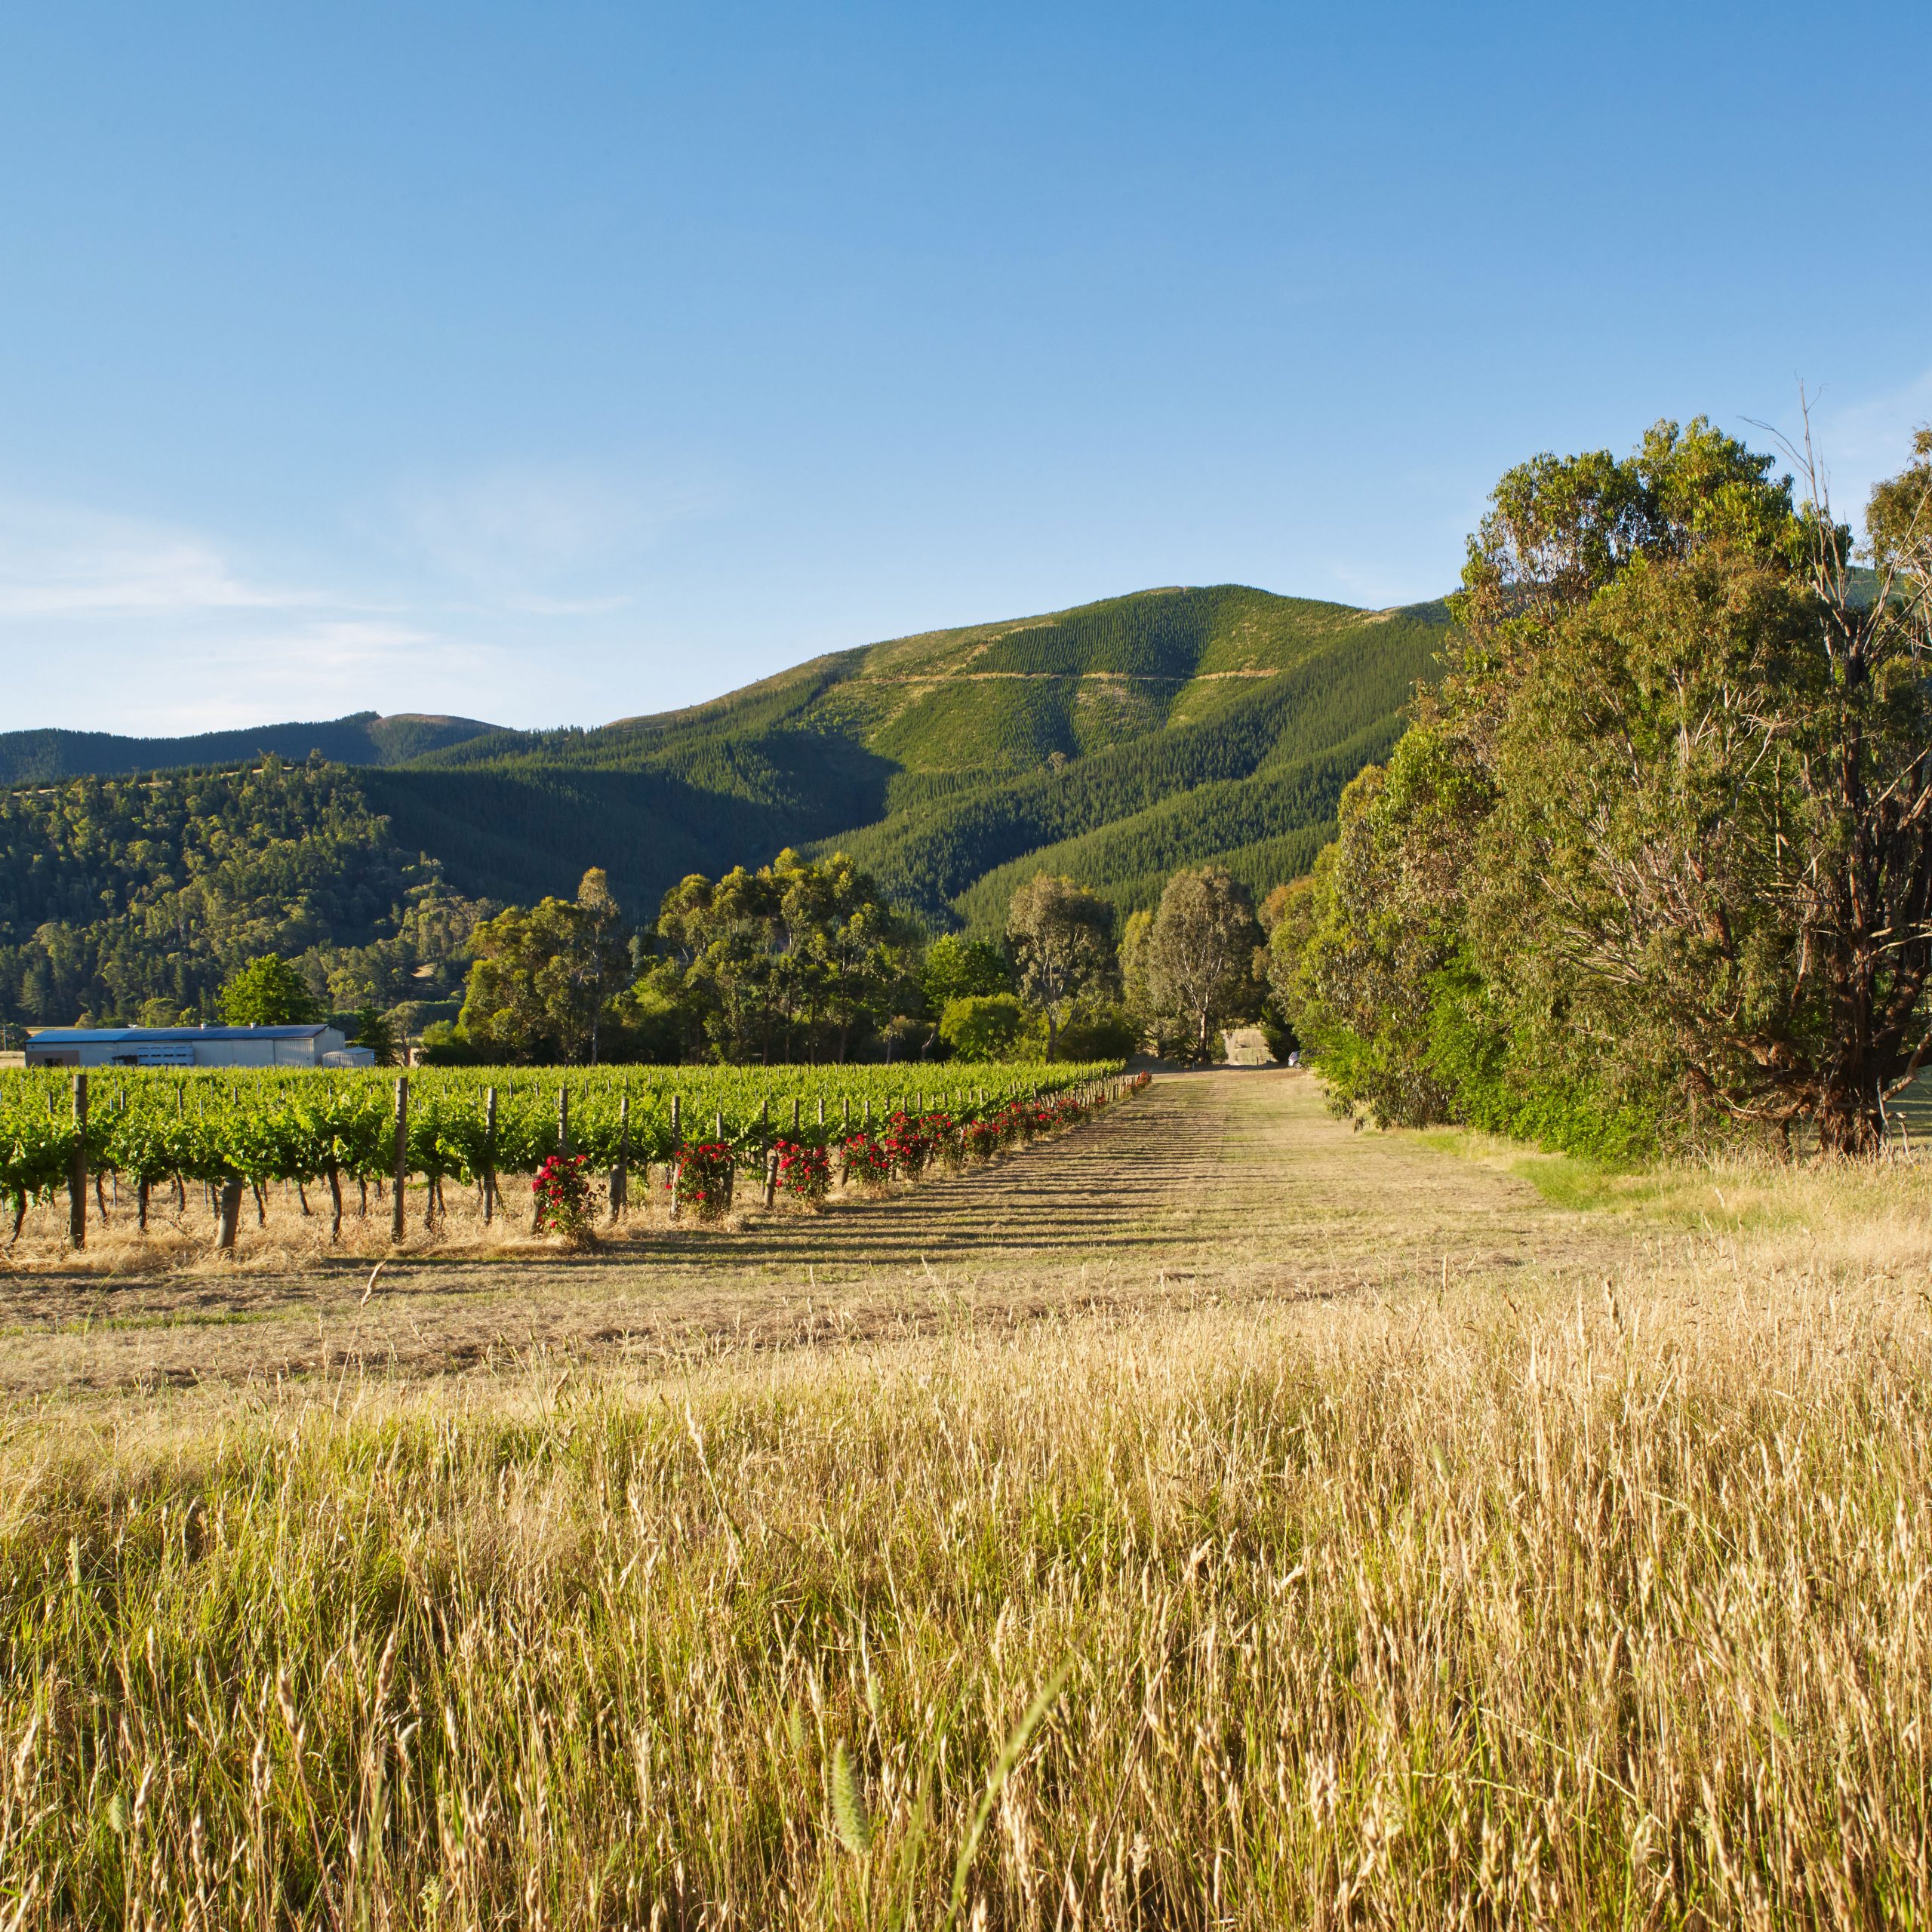 The Eagle Range Estate vineyard is located in the Happy Valley near Myrtleford, Victoria